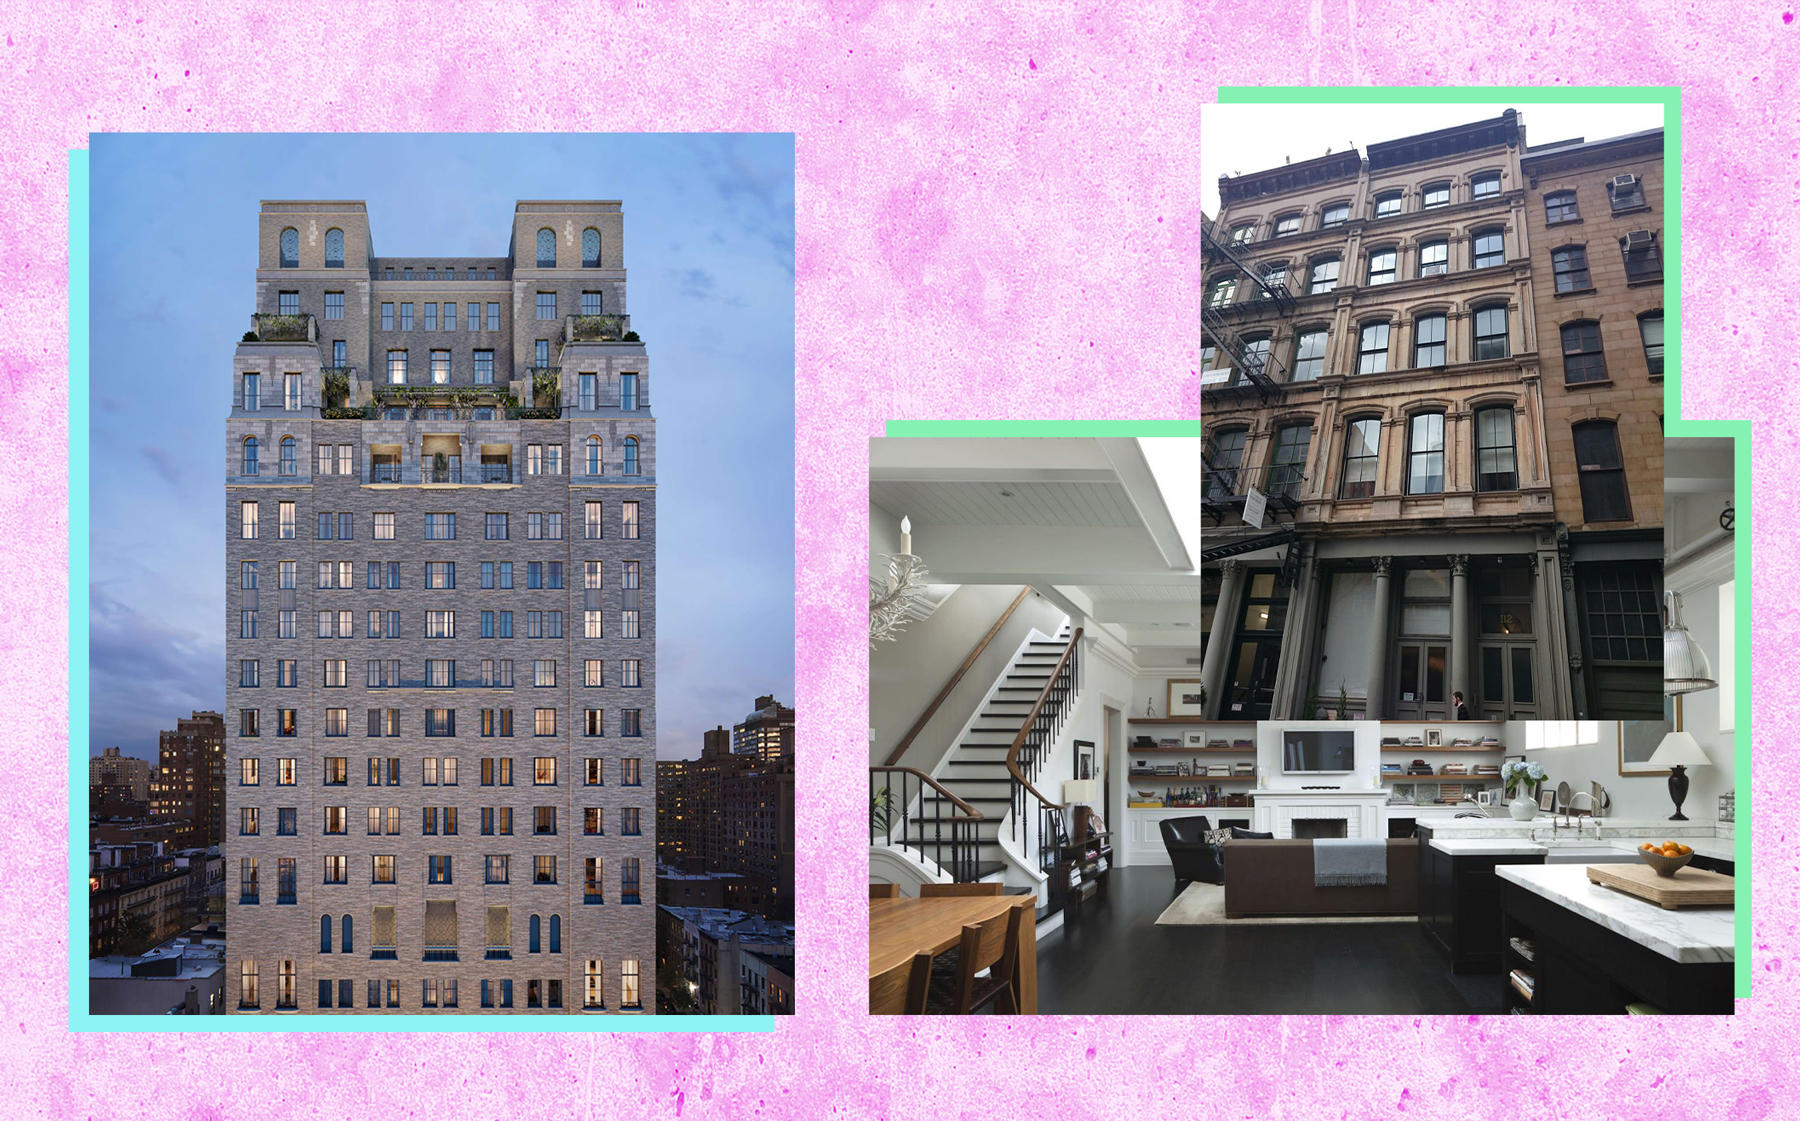 301 East 80th Street and the penthouse at 112 Franklin Street (Credit: Beckford Tower and Atelier)